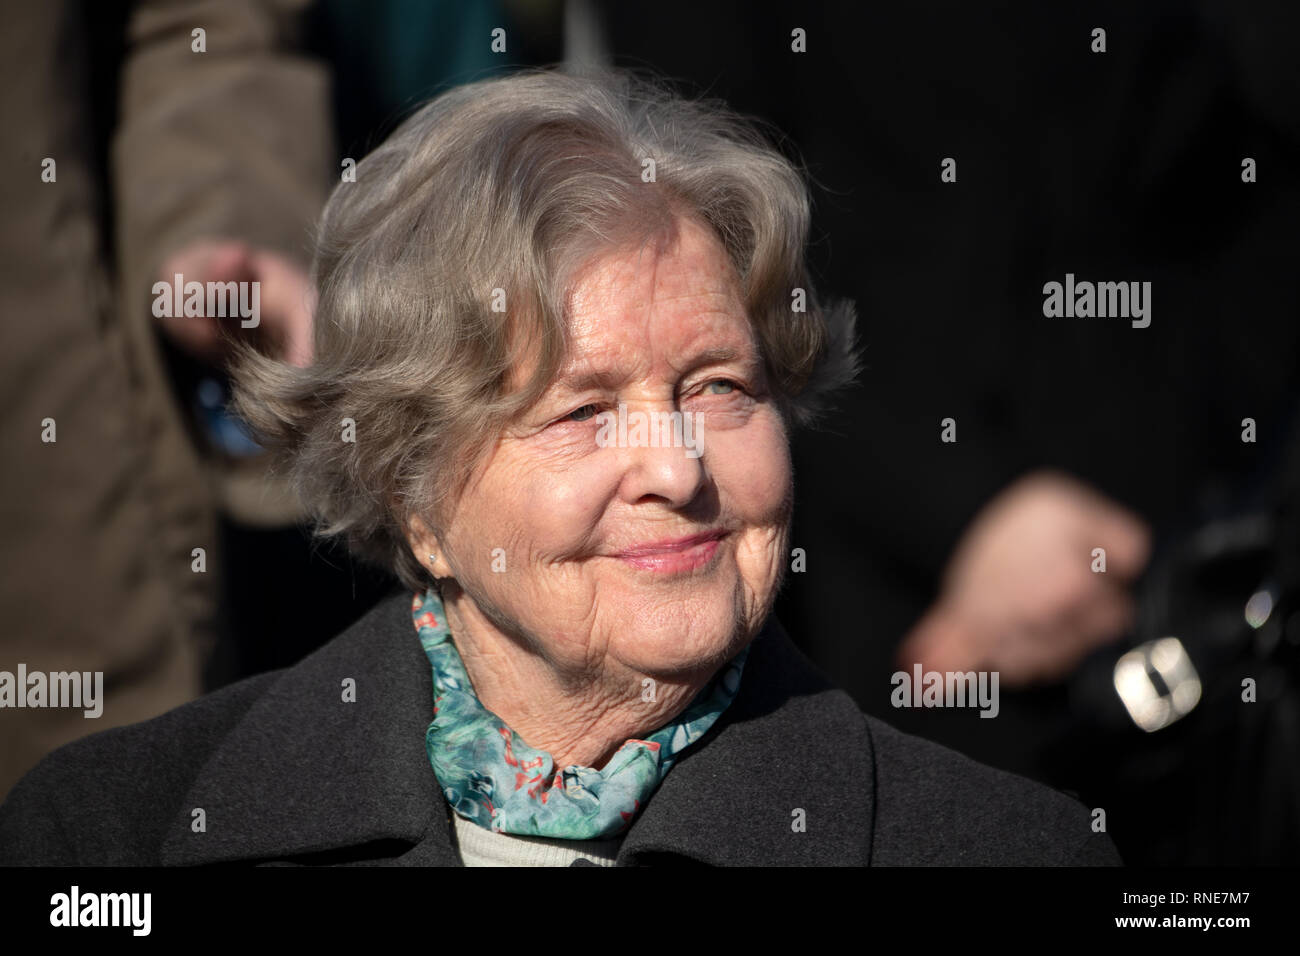 Potsdam, Germany. 18th Feb, 2019. Marianne von Weizsäcker, widow of the German President Richard von Weizsäcker, who died in 2015, during an event marking the start of construction of the church tower. Like the original, which was blown up in 1968 at the behest of the GDR leadership, the church tower is to be bricked up to a height of almost 90 metres with around 2.3 million bricks. Credit: Ralf Hirschberger/dpa/Alamy Live News Stock Photo